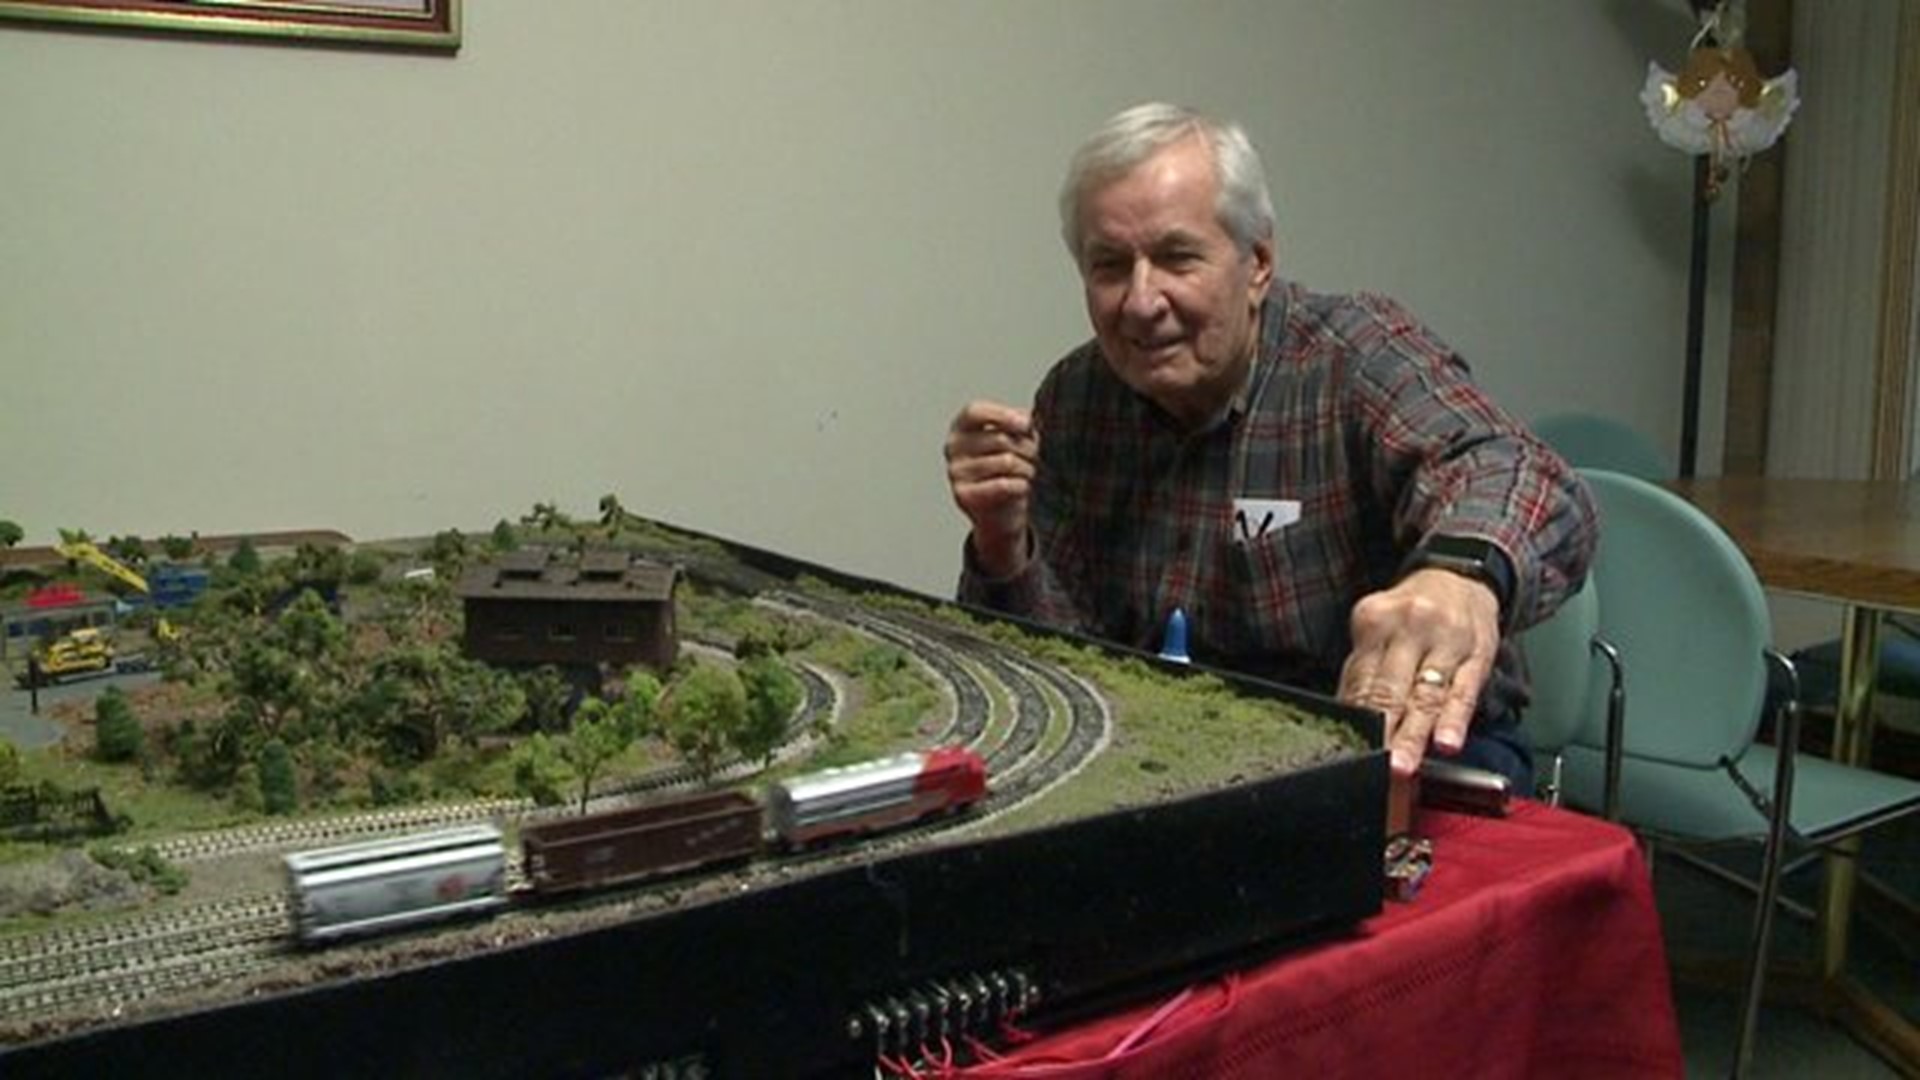 Take a Ride with Some Tiny Trains